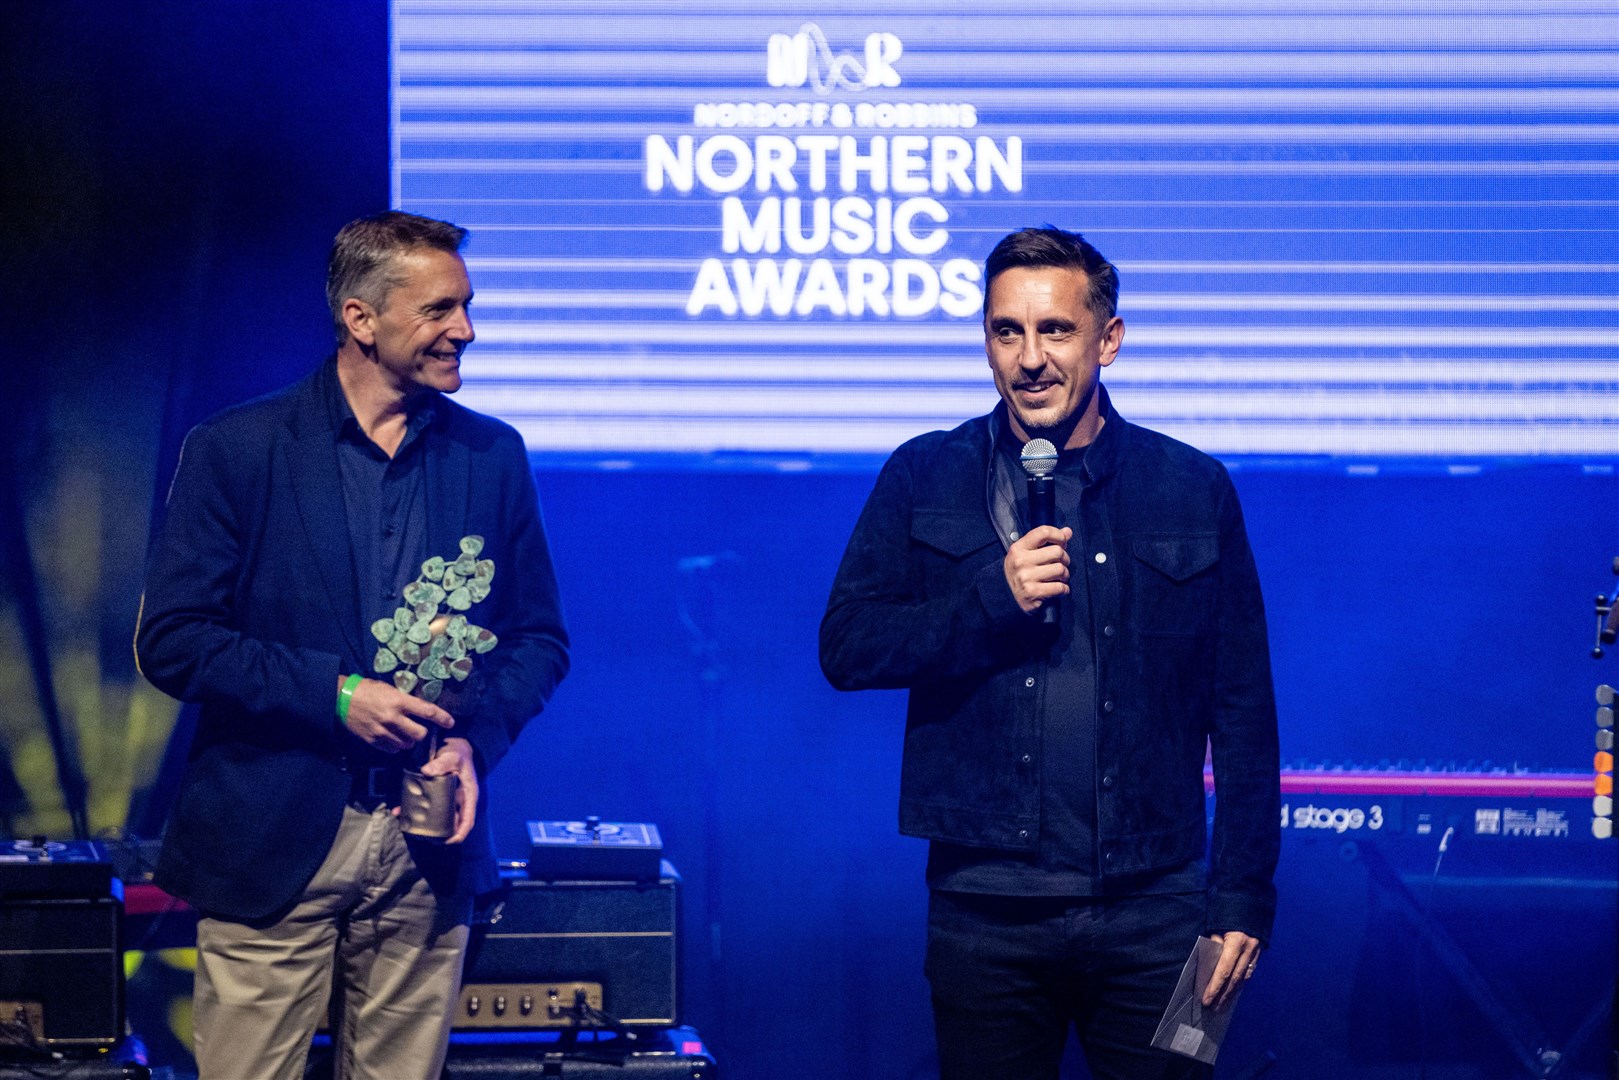 Gary Neville presents the best band award to The Courteeners at the first Nordoff and Robbins Northern Music Awards (James Speakman/PA)